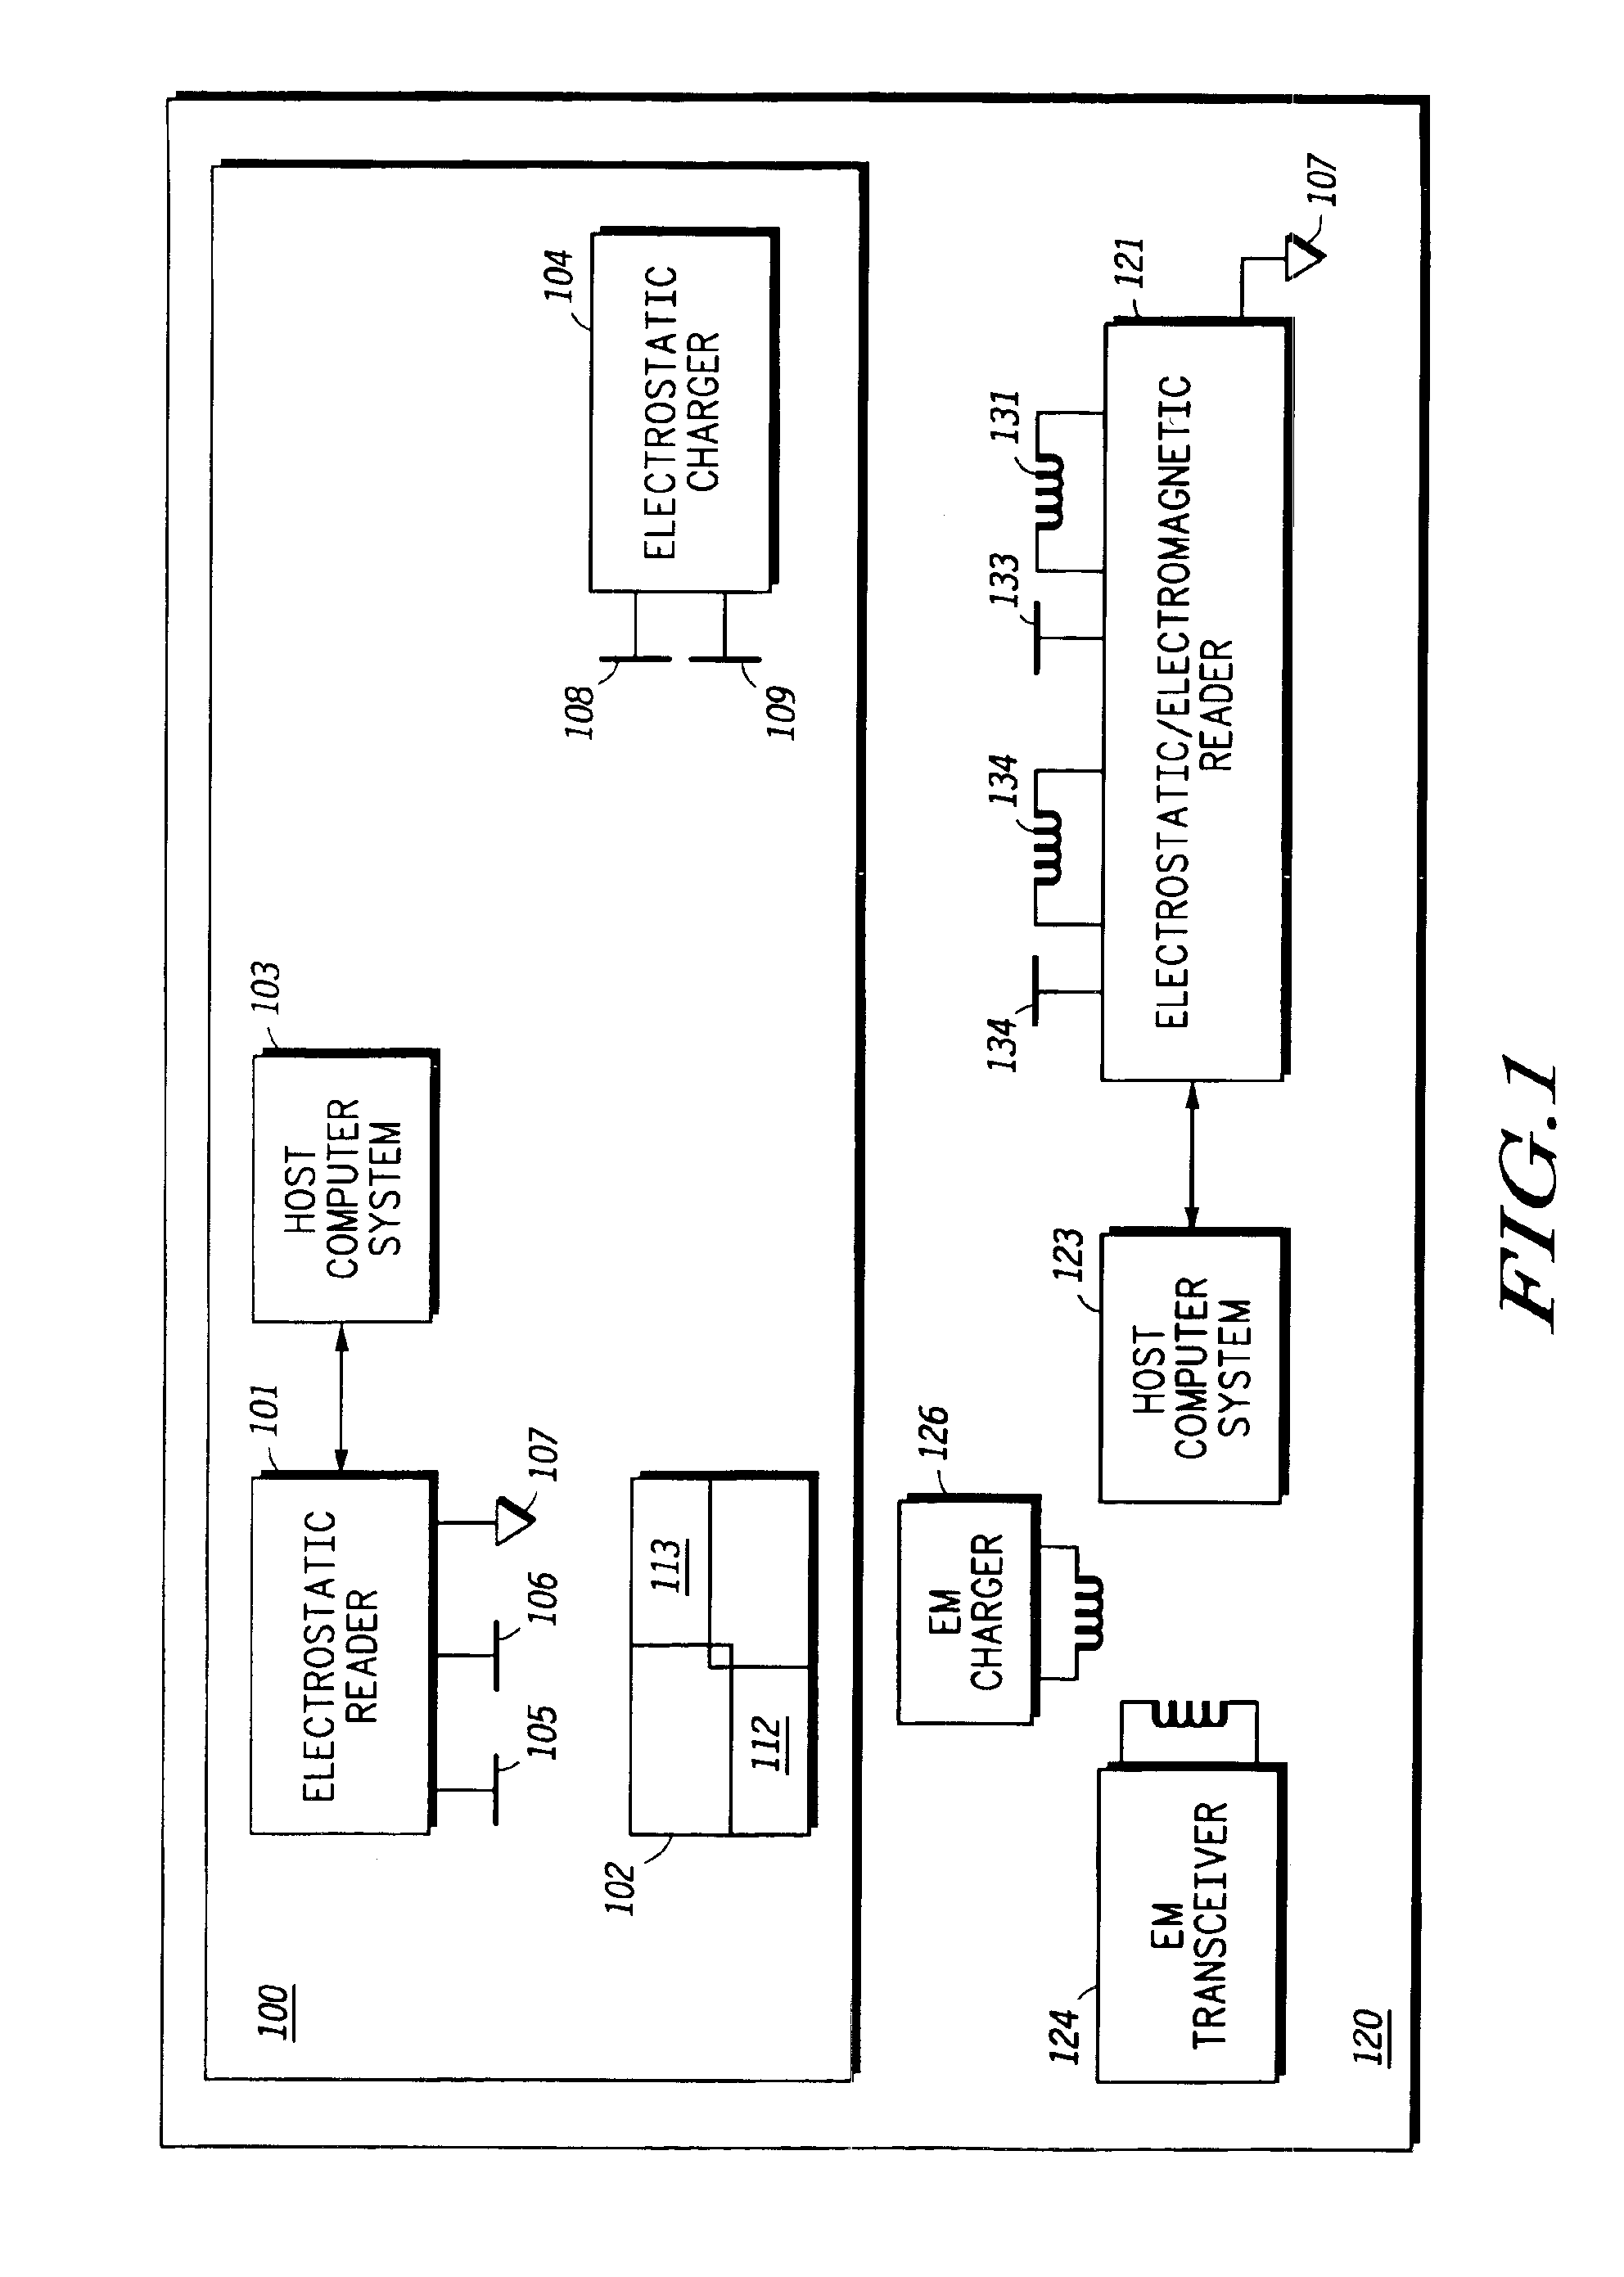 Wireless electrostatic charging and communicating system